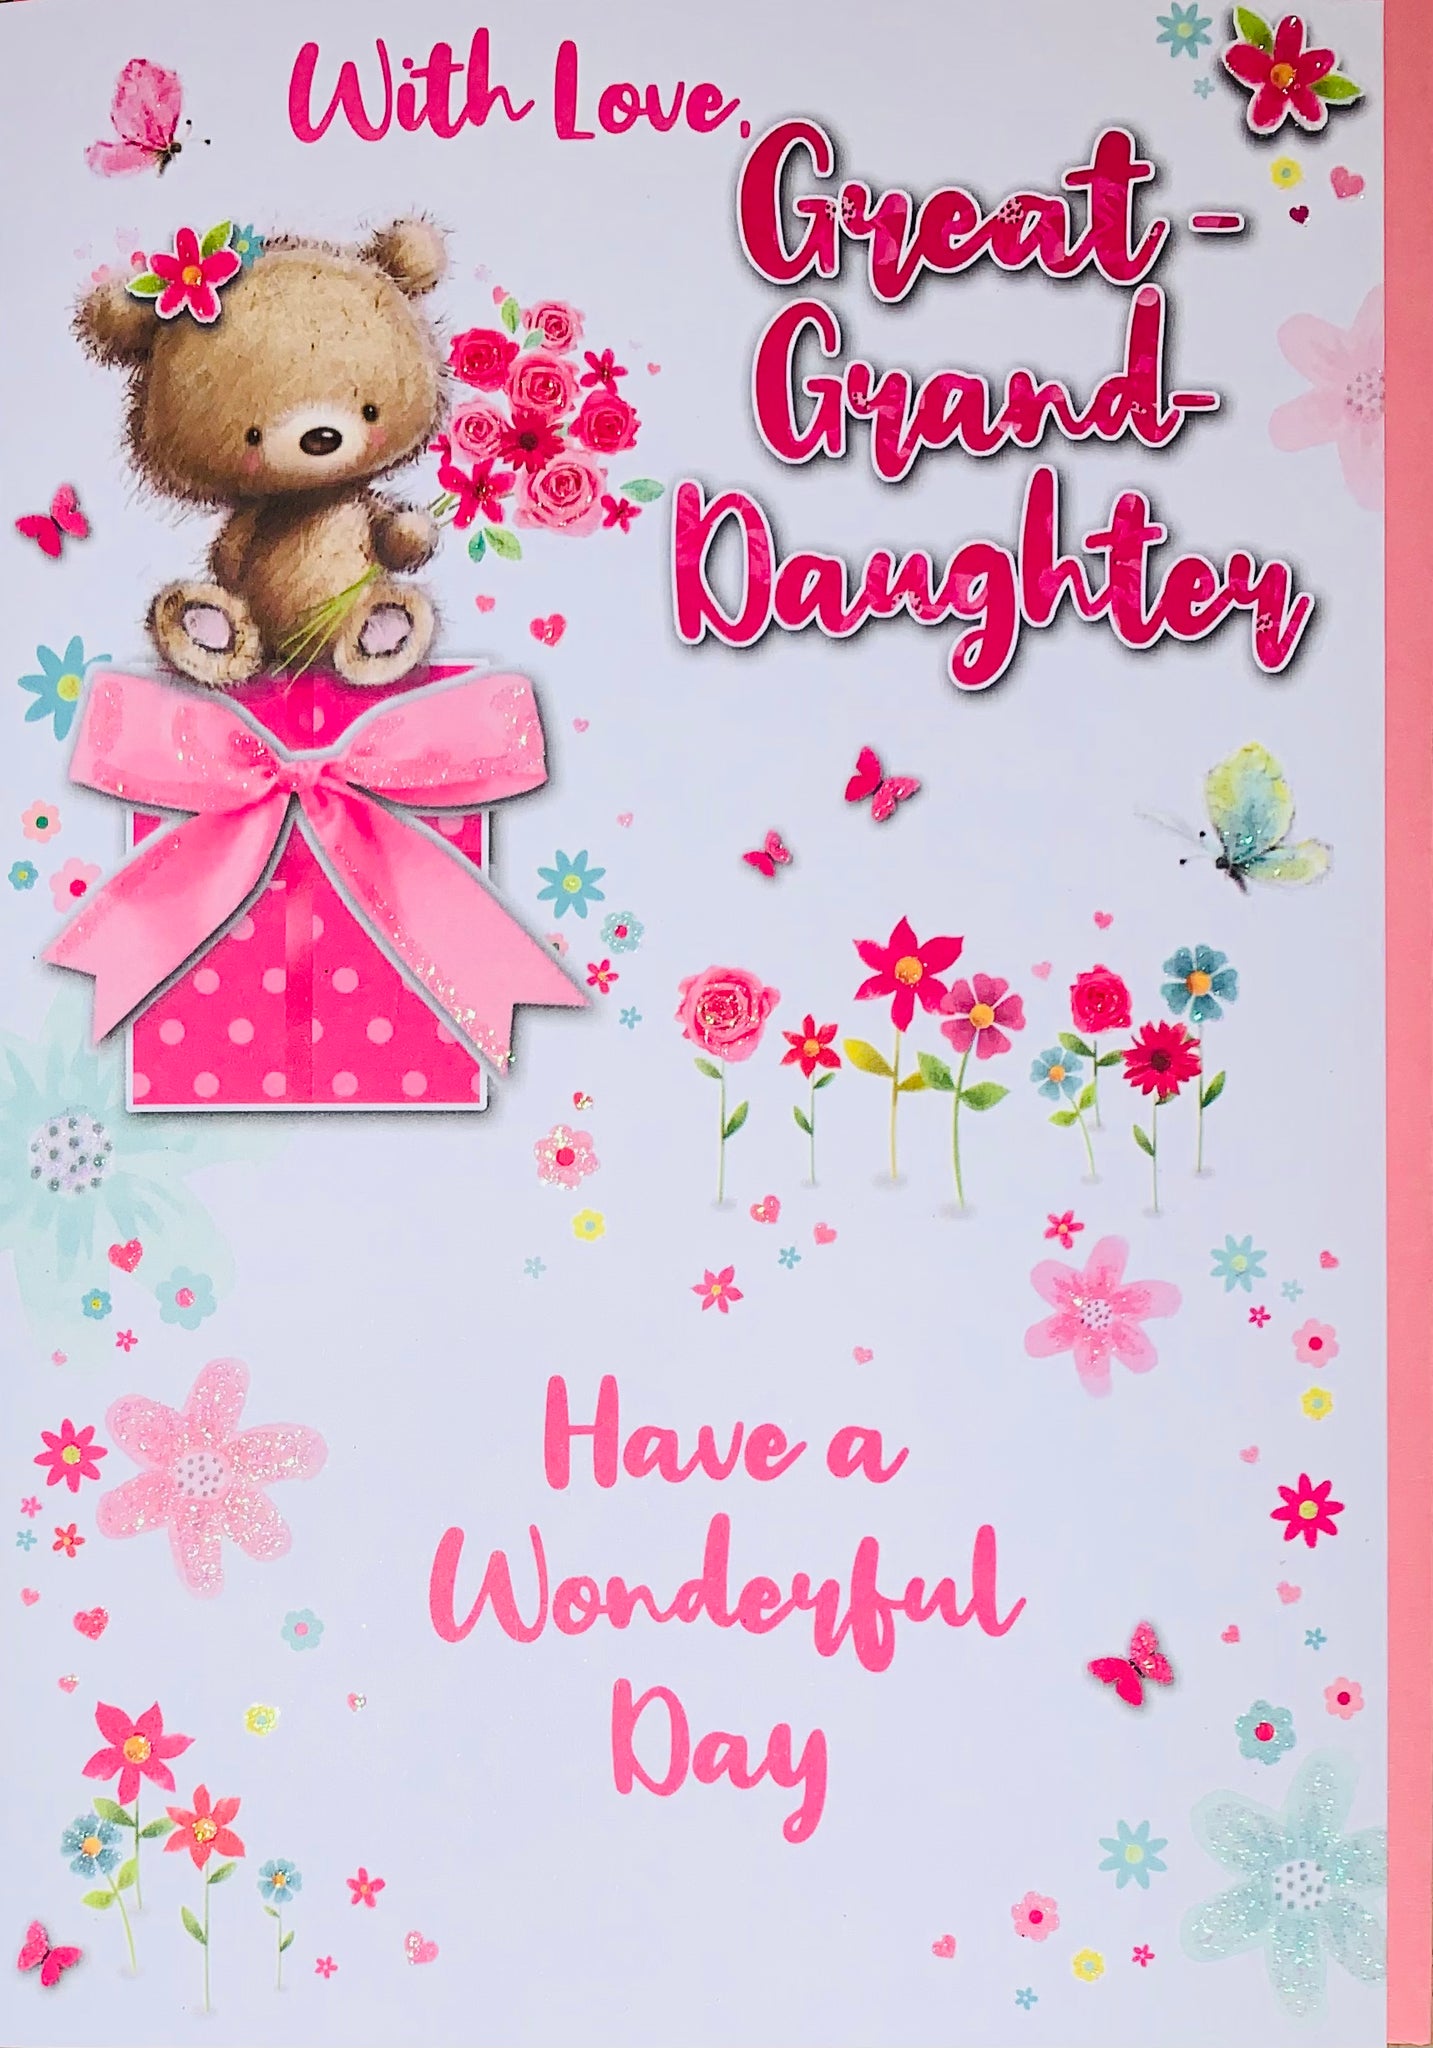 Great-Granddaughter birthday card- cute bear and gift